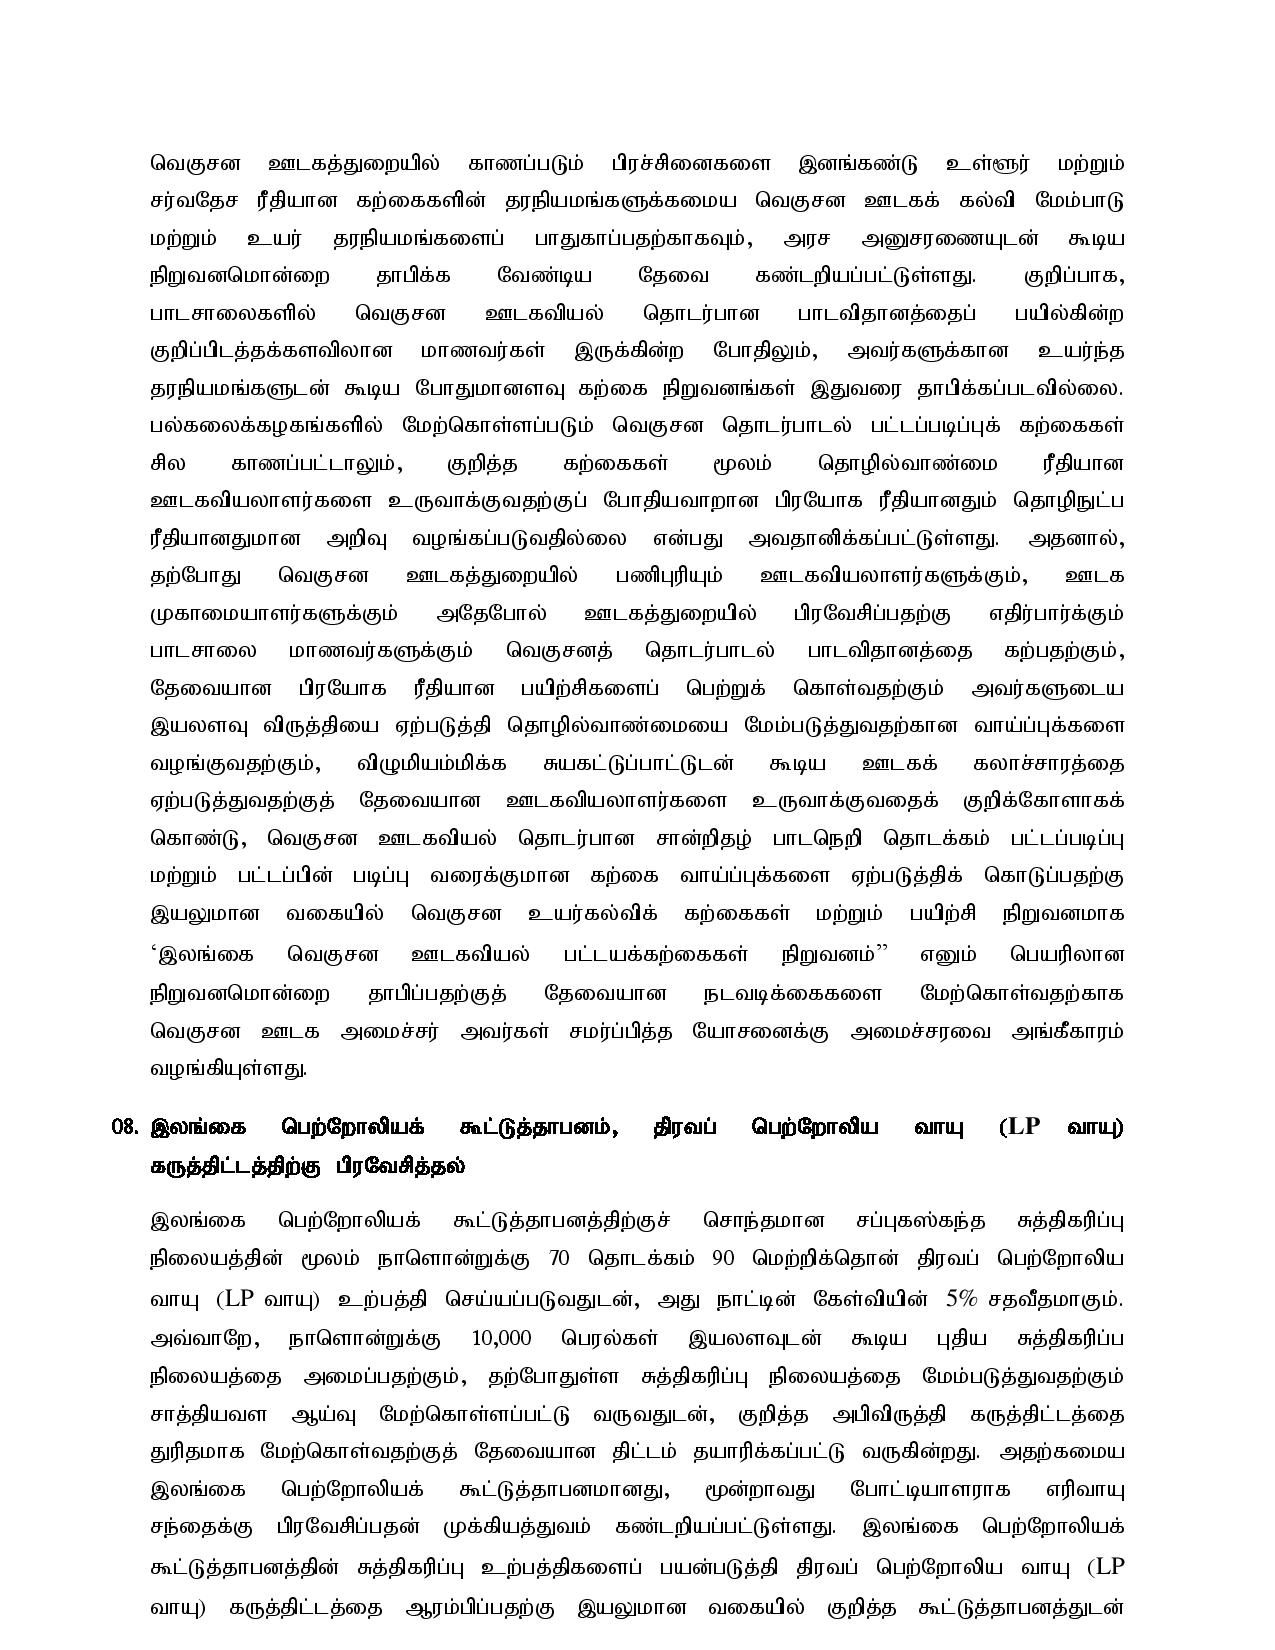 Cabinet Decision on 05.10.2021 Tamil page 004